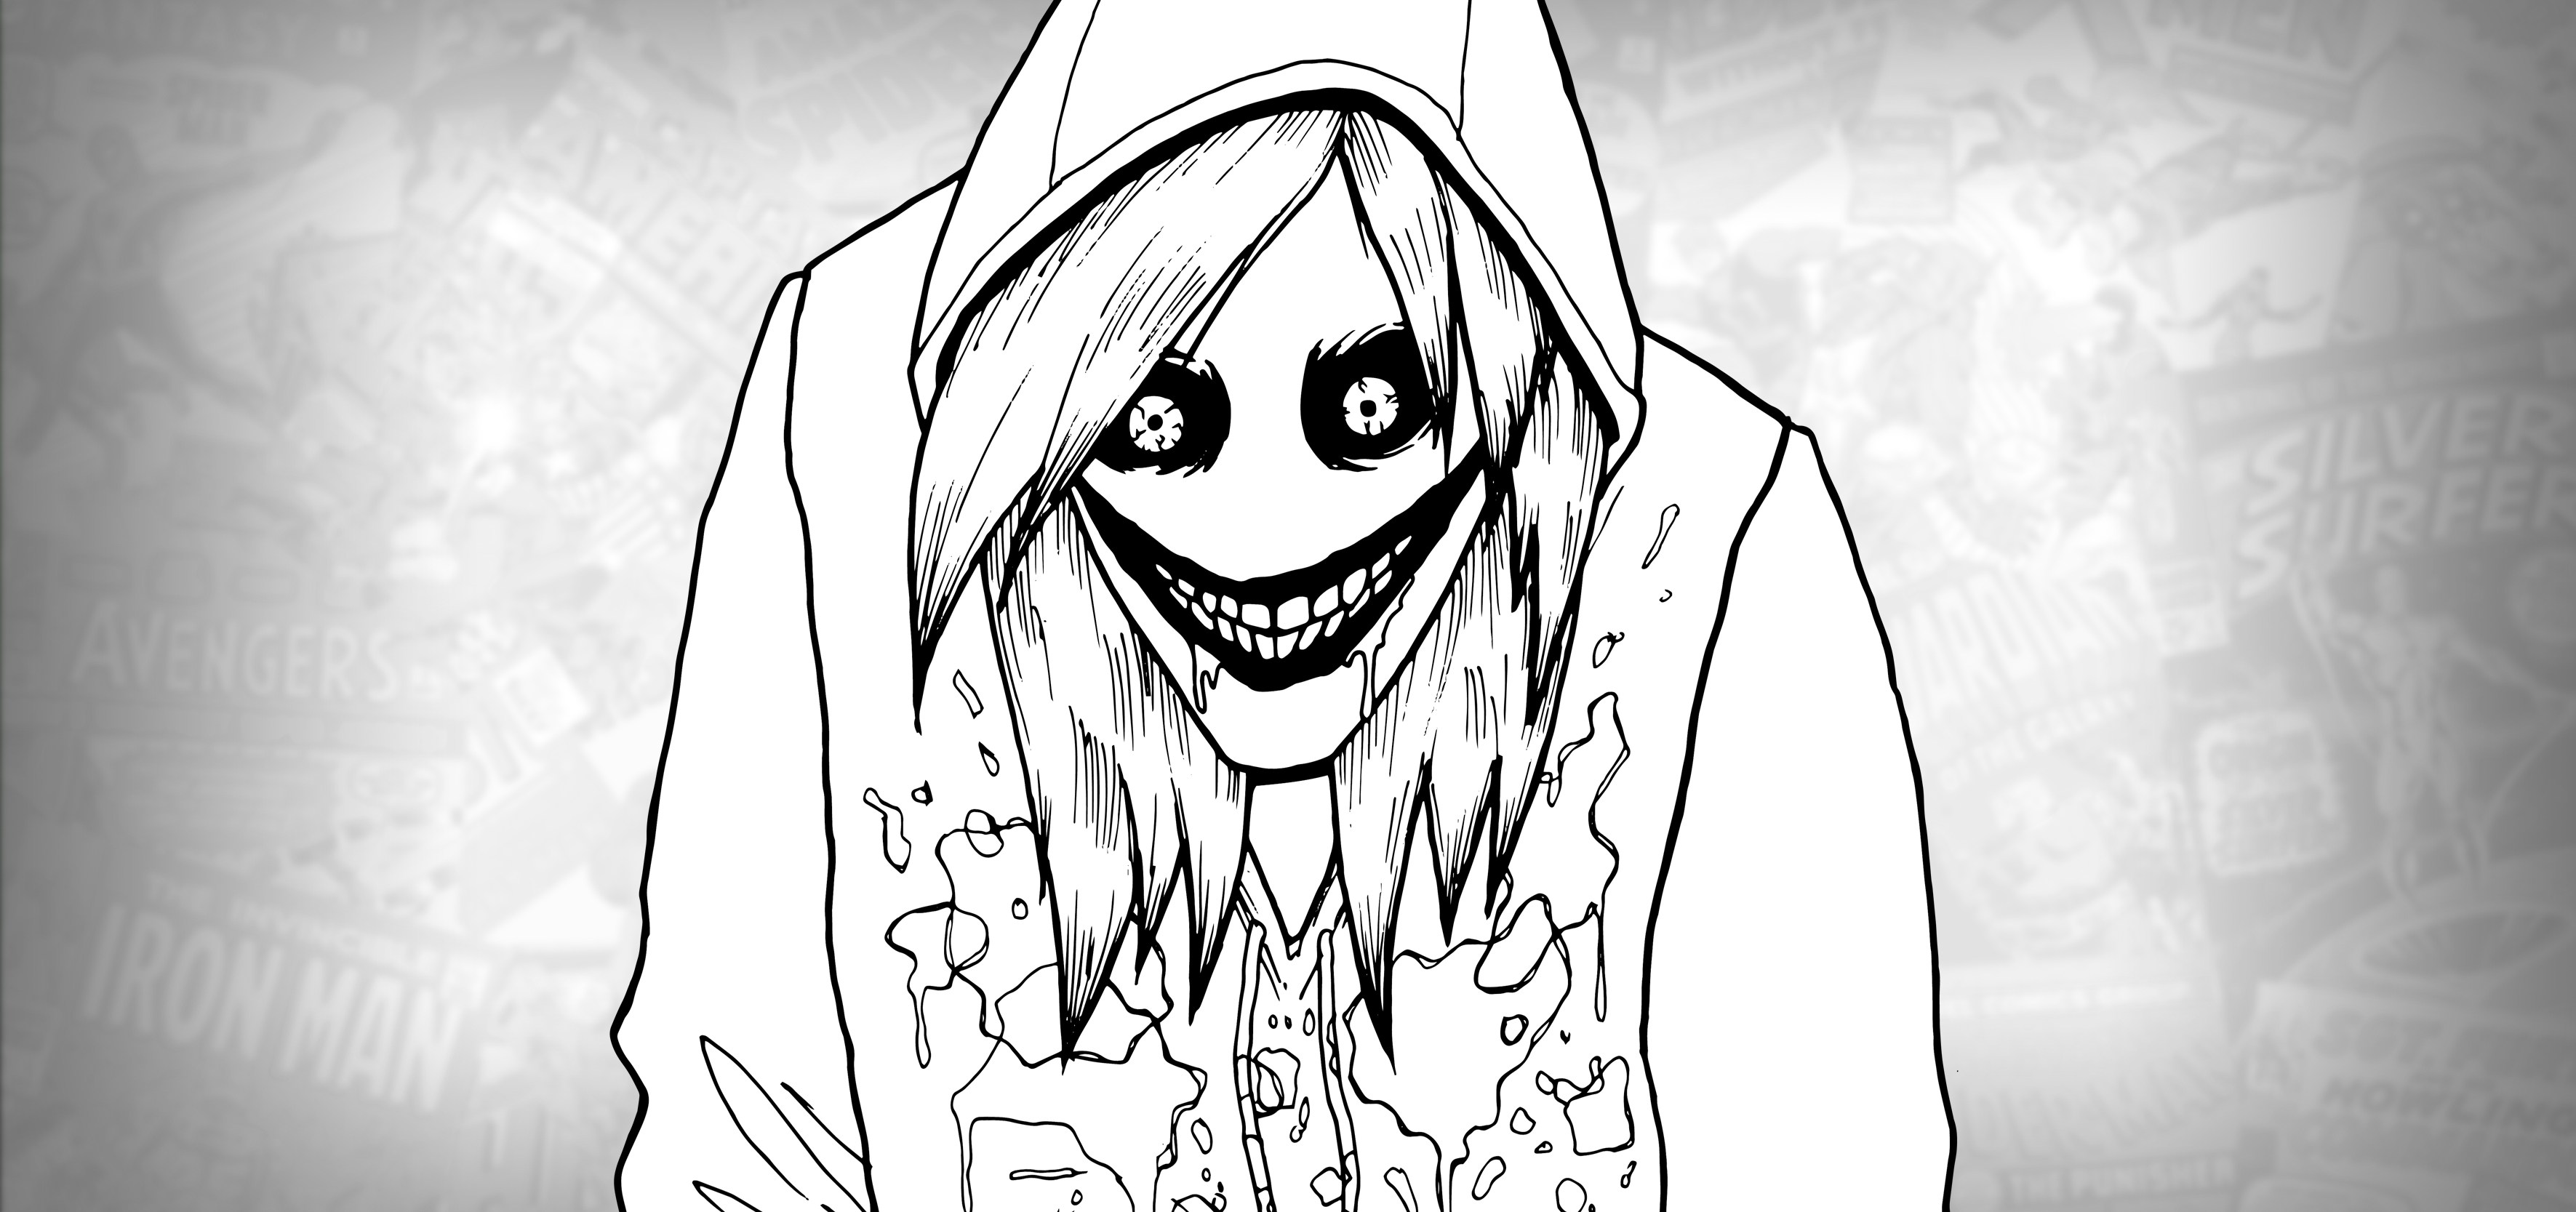 How To Draw Jeff The Killer - Jeff The Killer Drawing. 